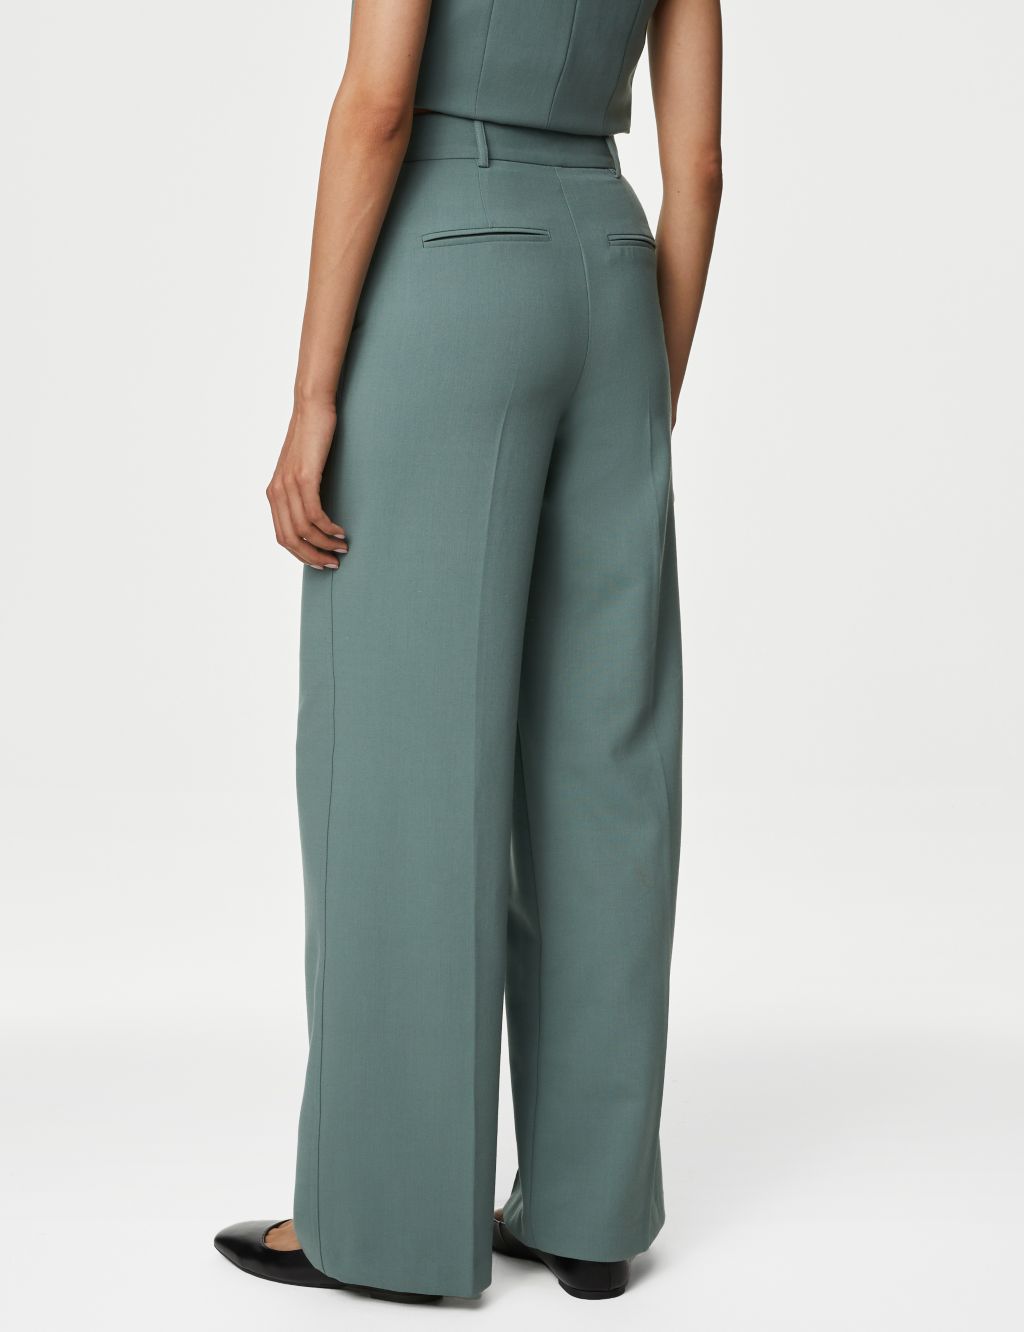 Woven Wide Leg Trousers image 5